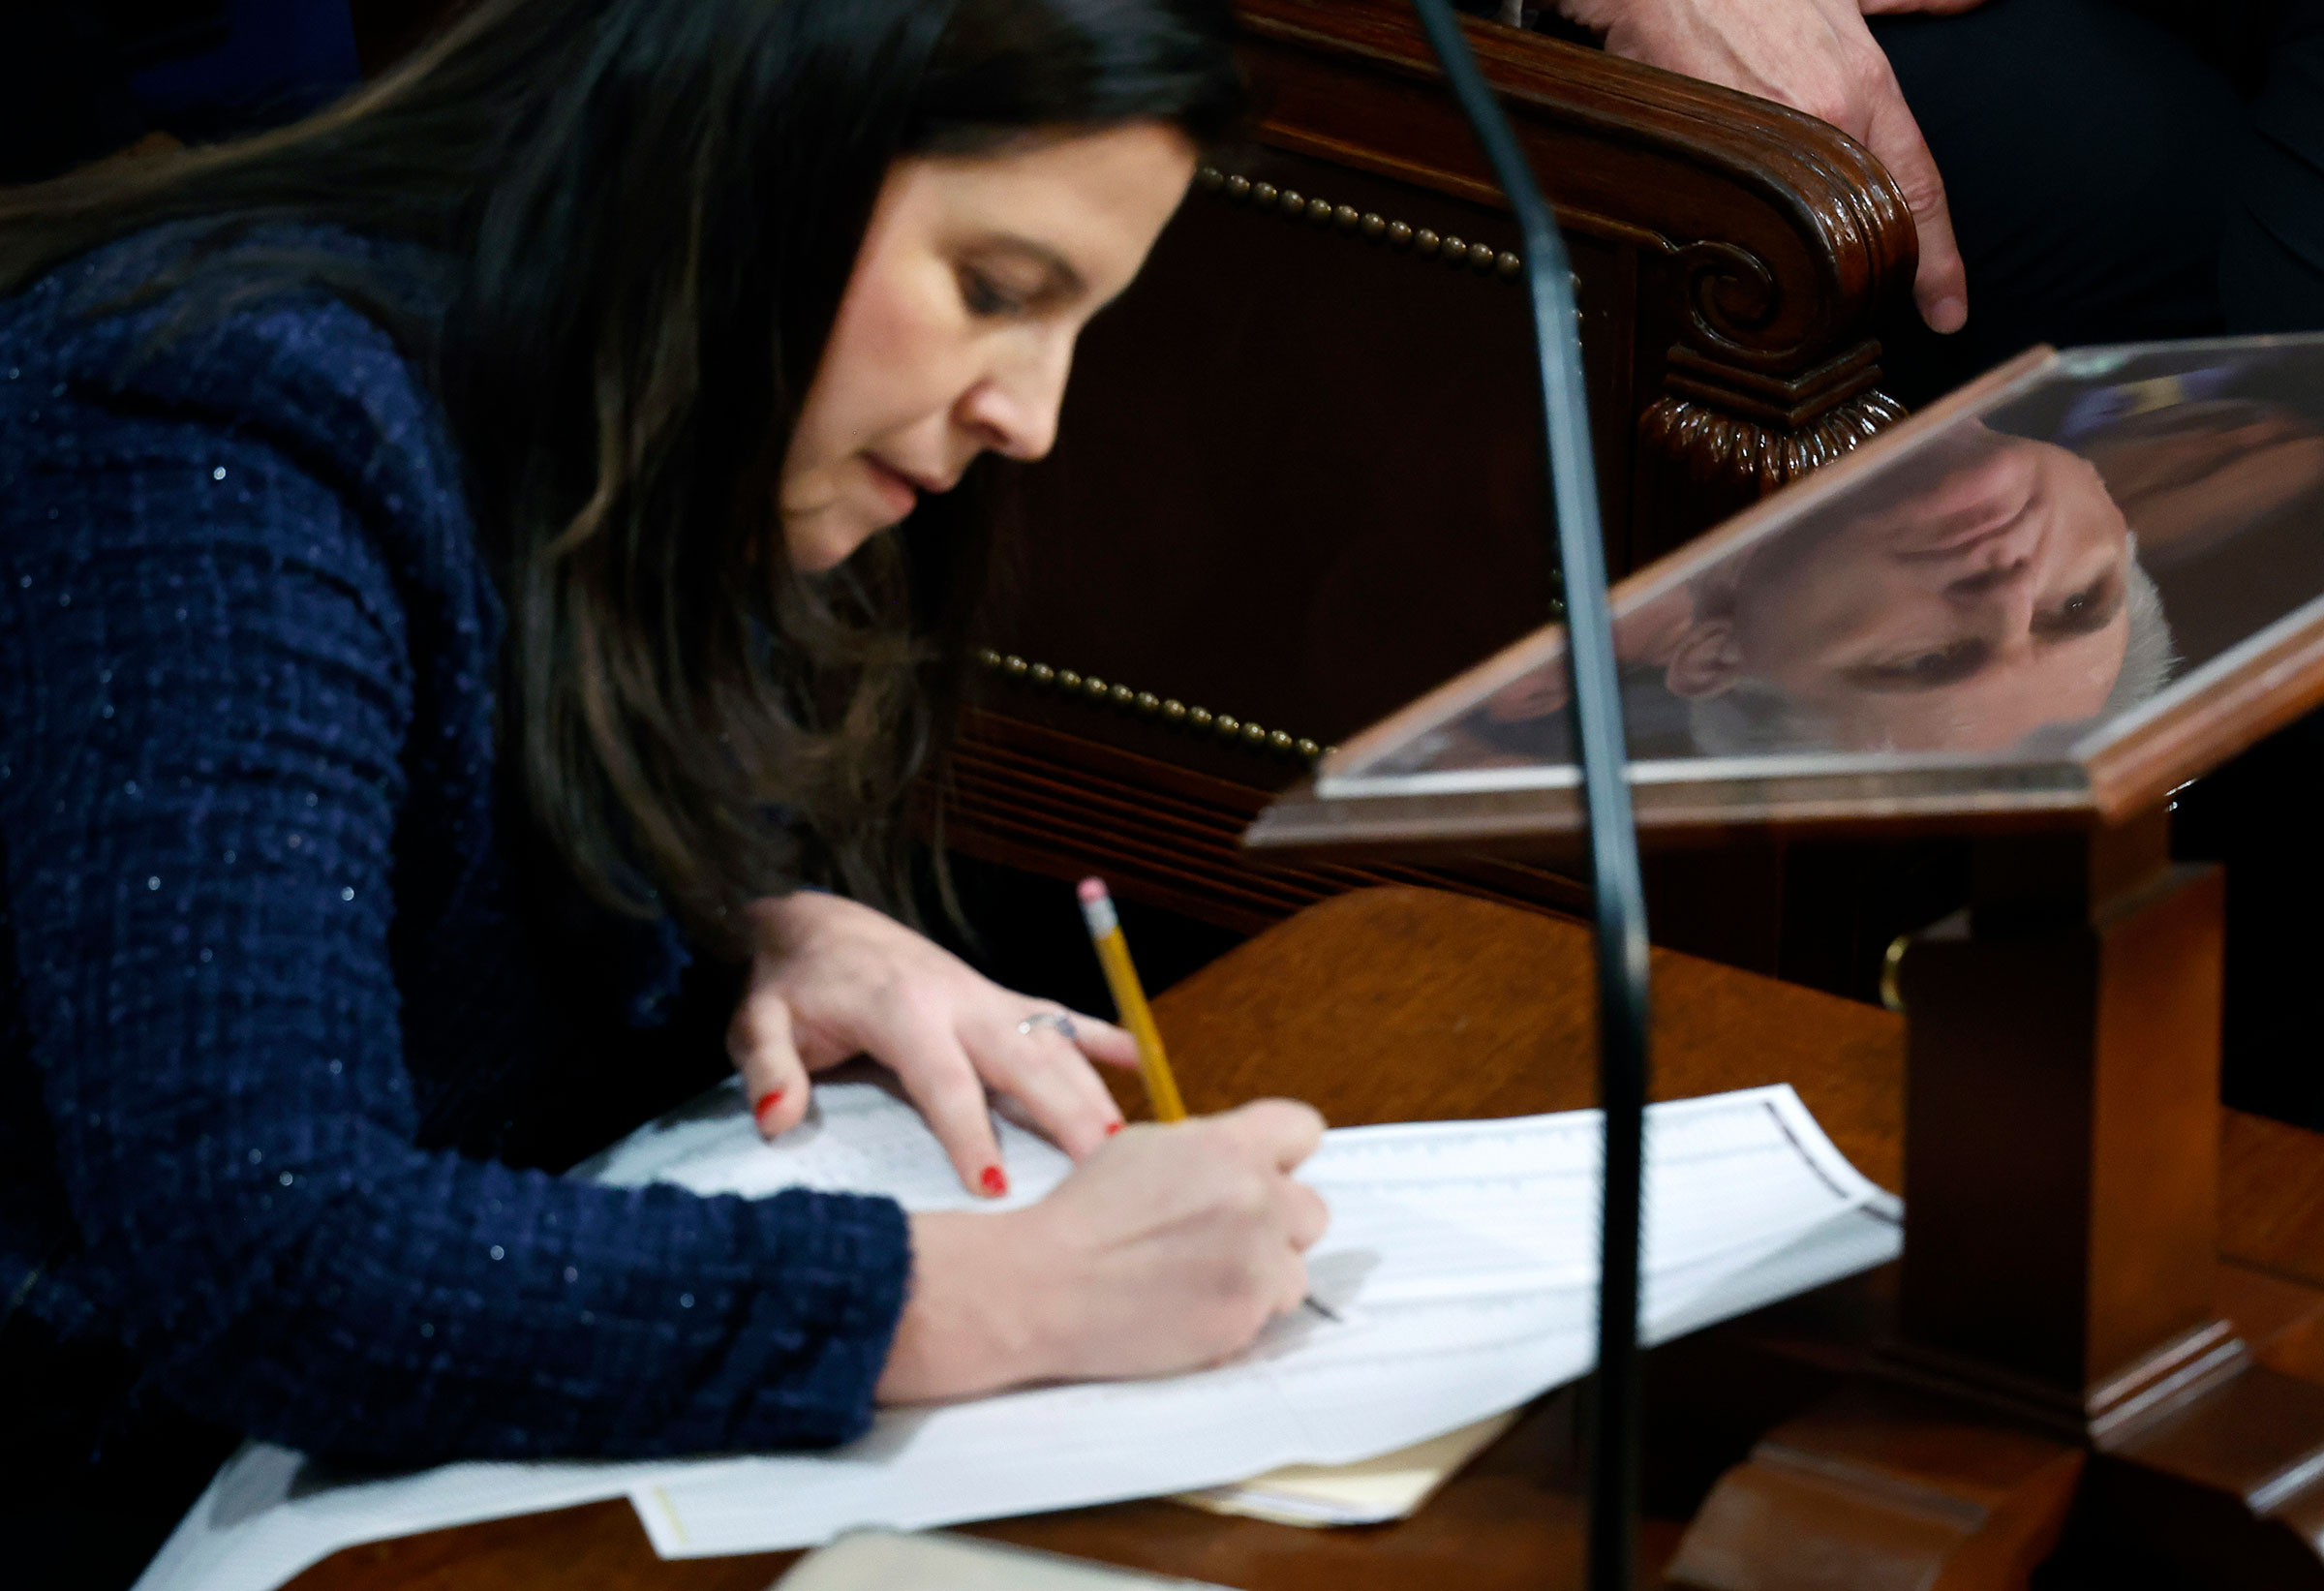 The face of House Republican Leader Kevin McCarthy is seen reflected as Rep. Elise Stefanik tallies votes in the House Chamber during the third day of elections for Speaker of the House on Jan. 5, 2023. (Chip Somodevilla—Getty Images)